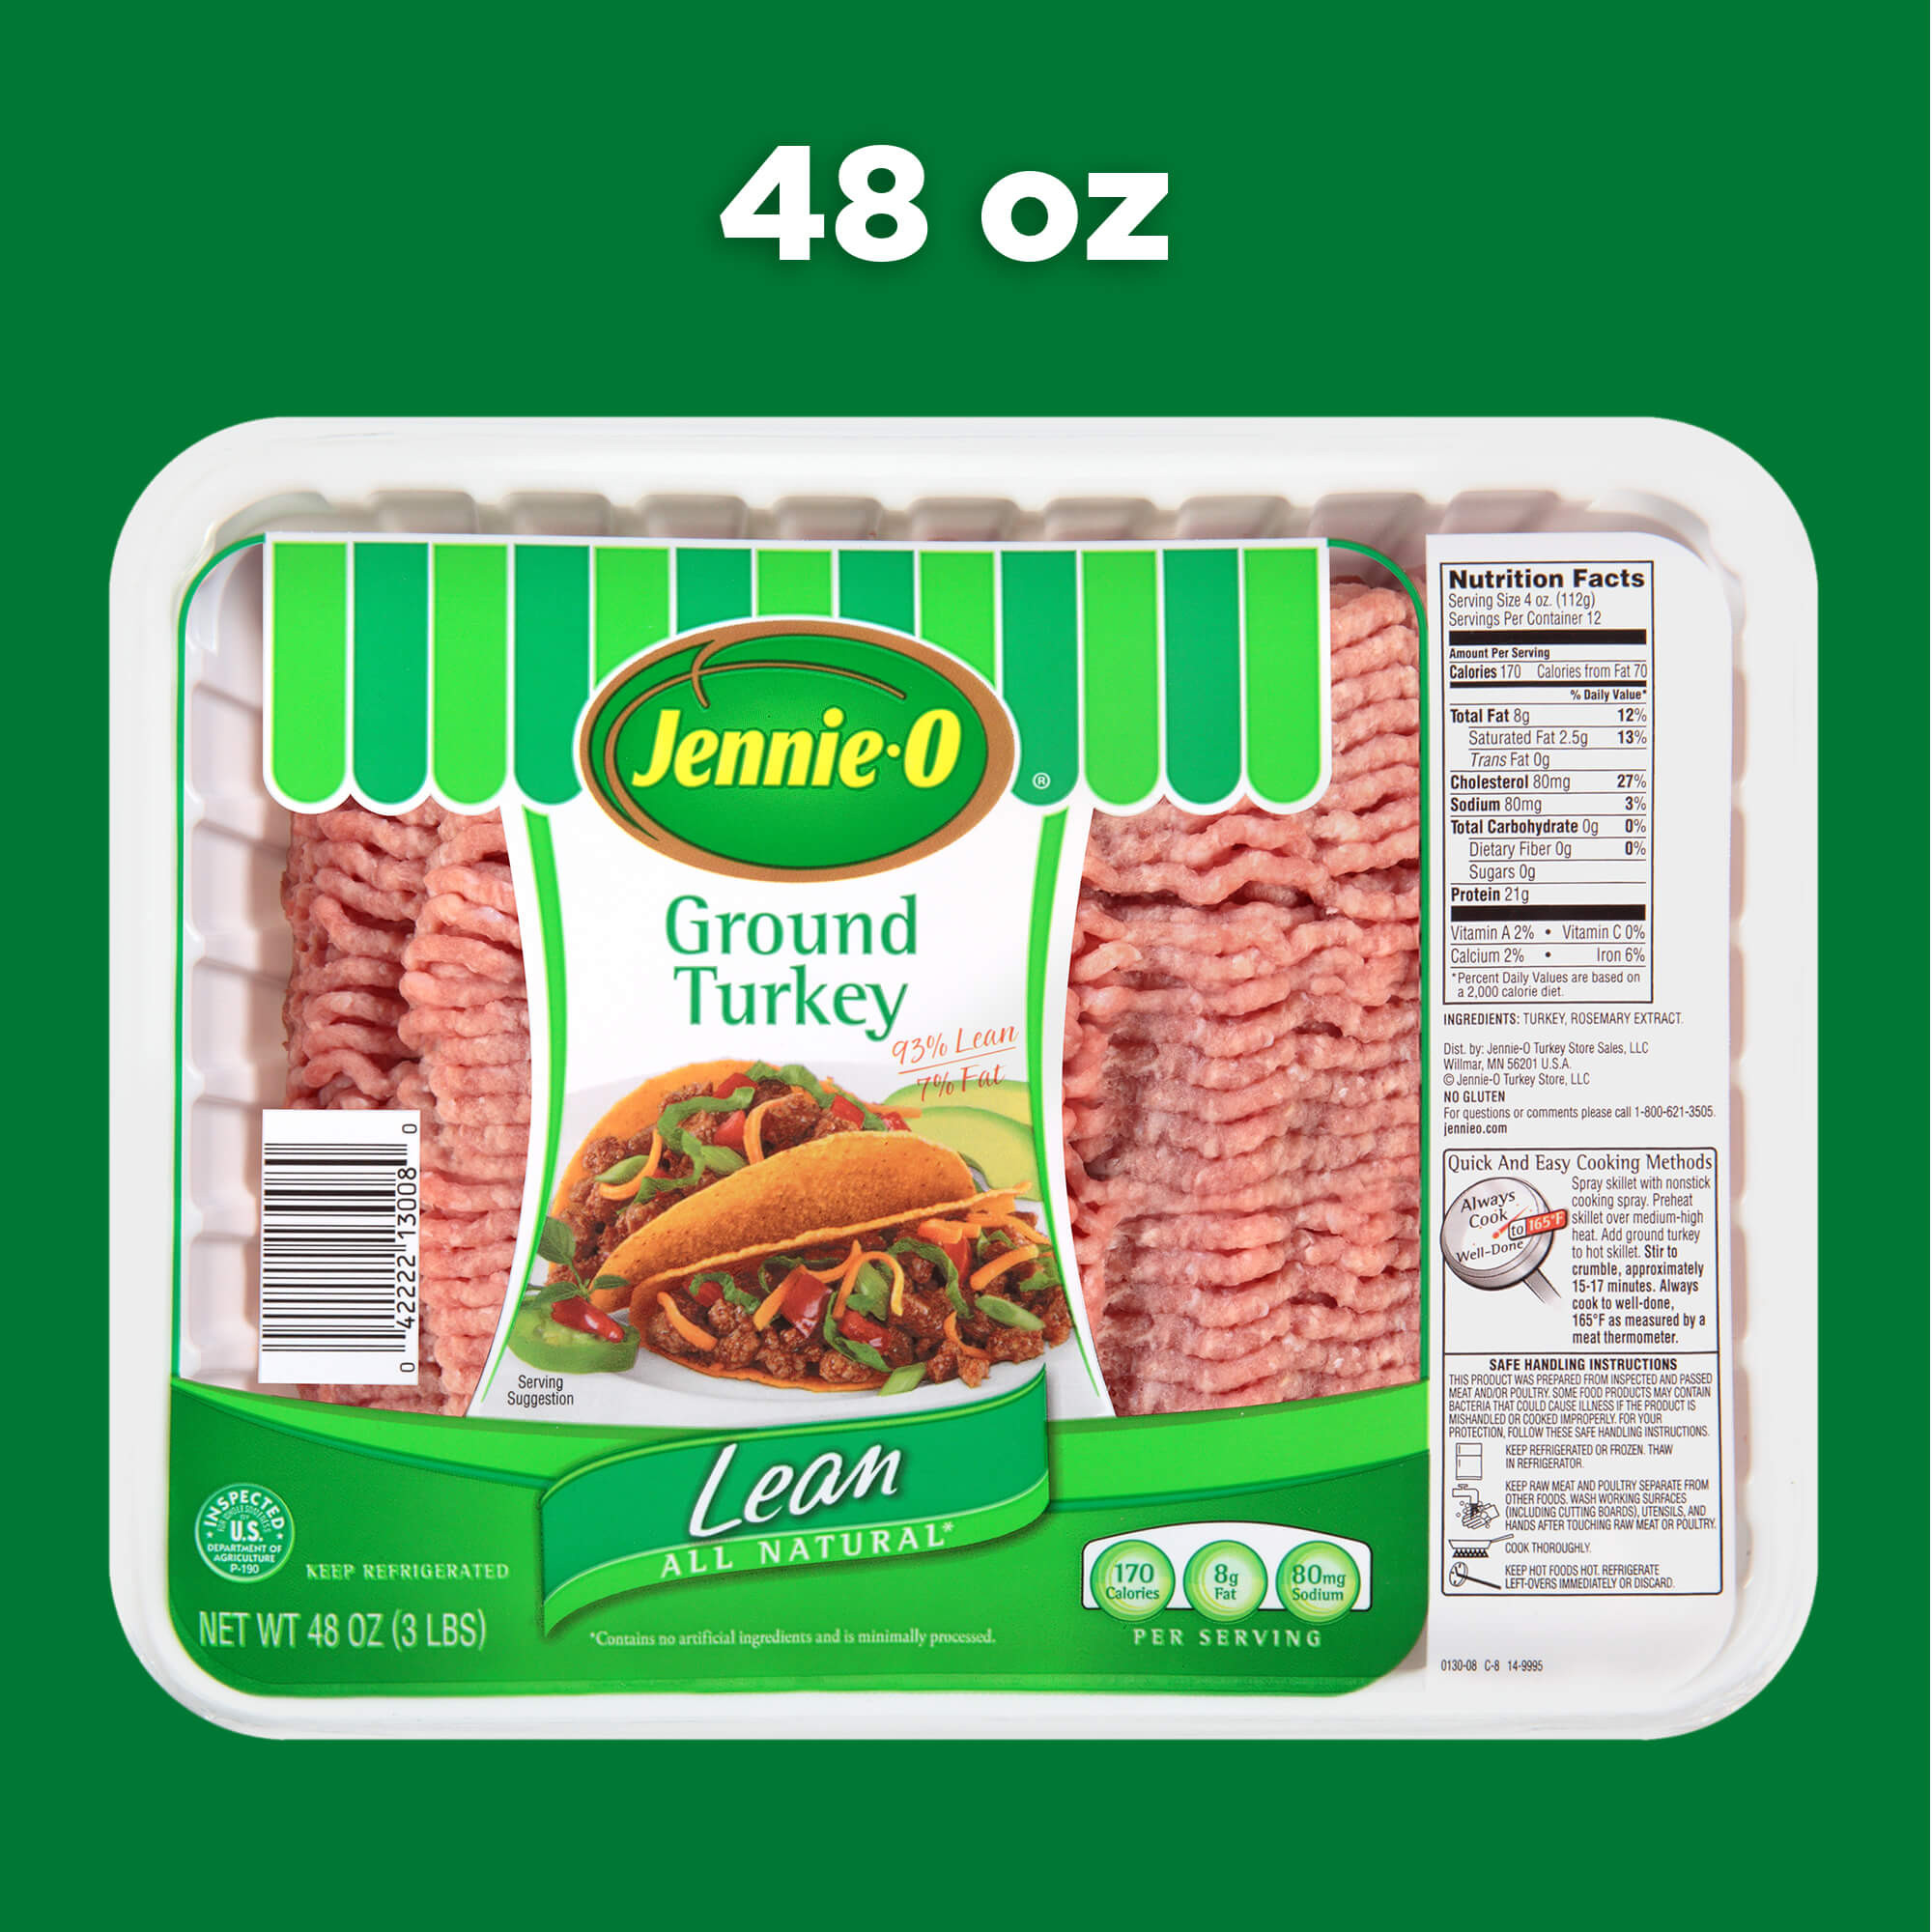 Calories In A Pound Of Ground Turkey Awesome How Many Calories In A Pound Of Ground Turkey